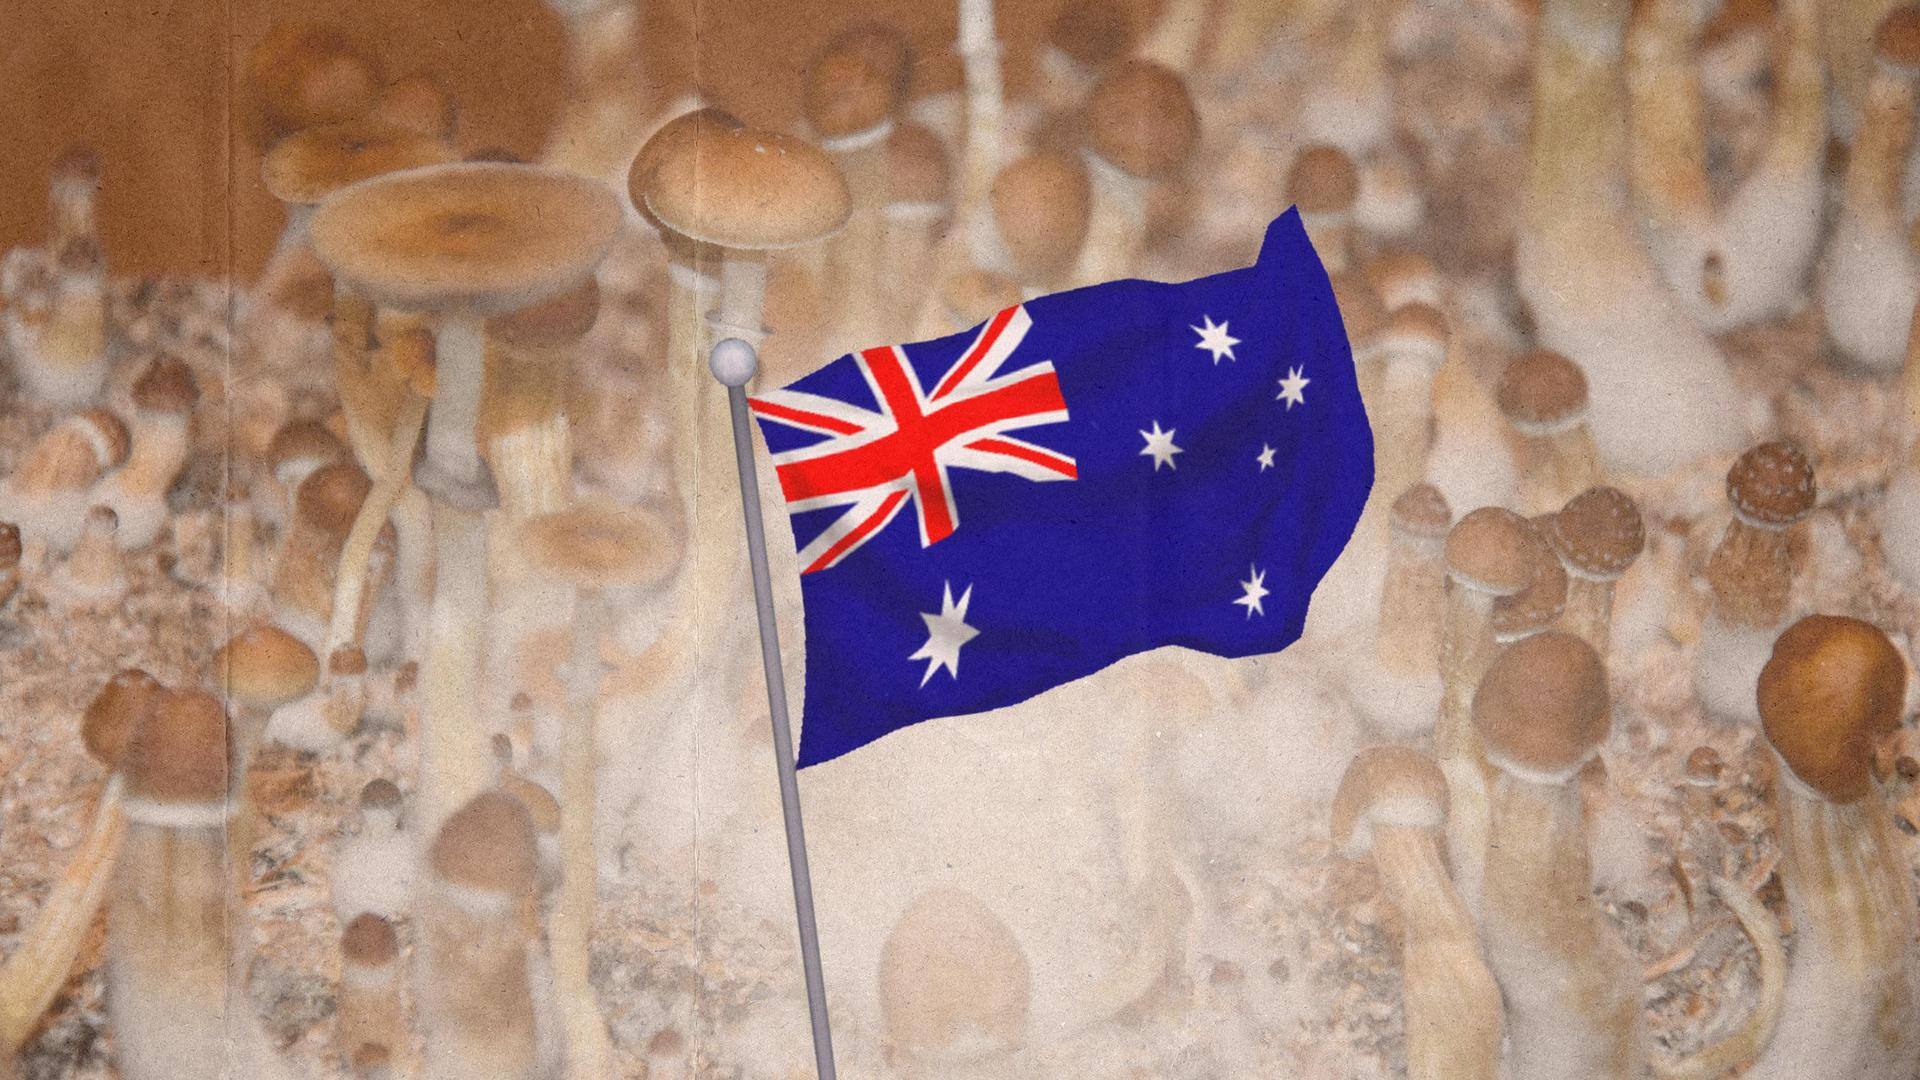 Australia becomes first country to allow psychedelics to treat depression